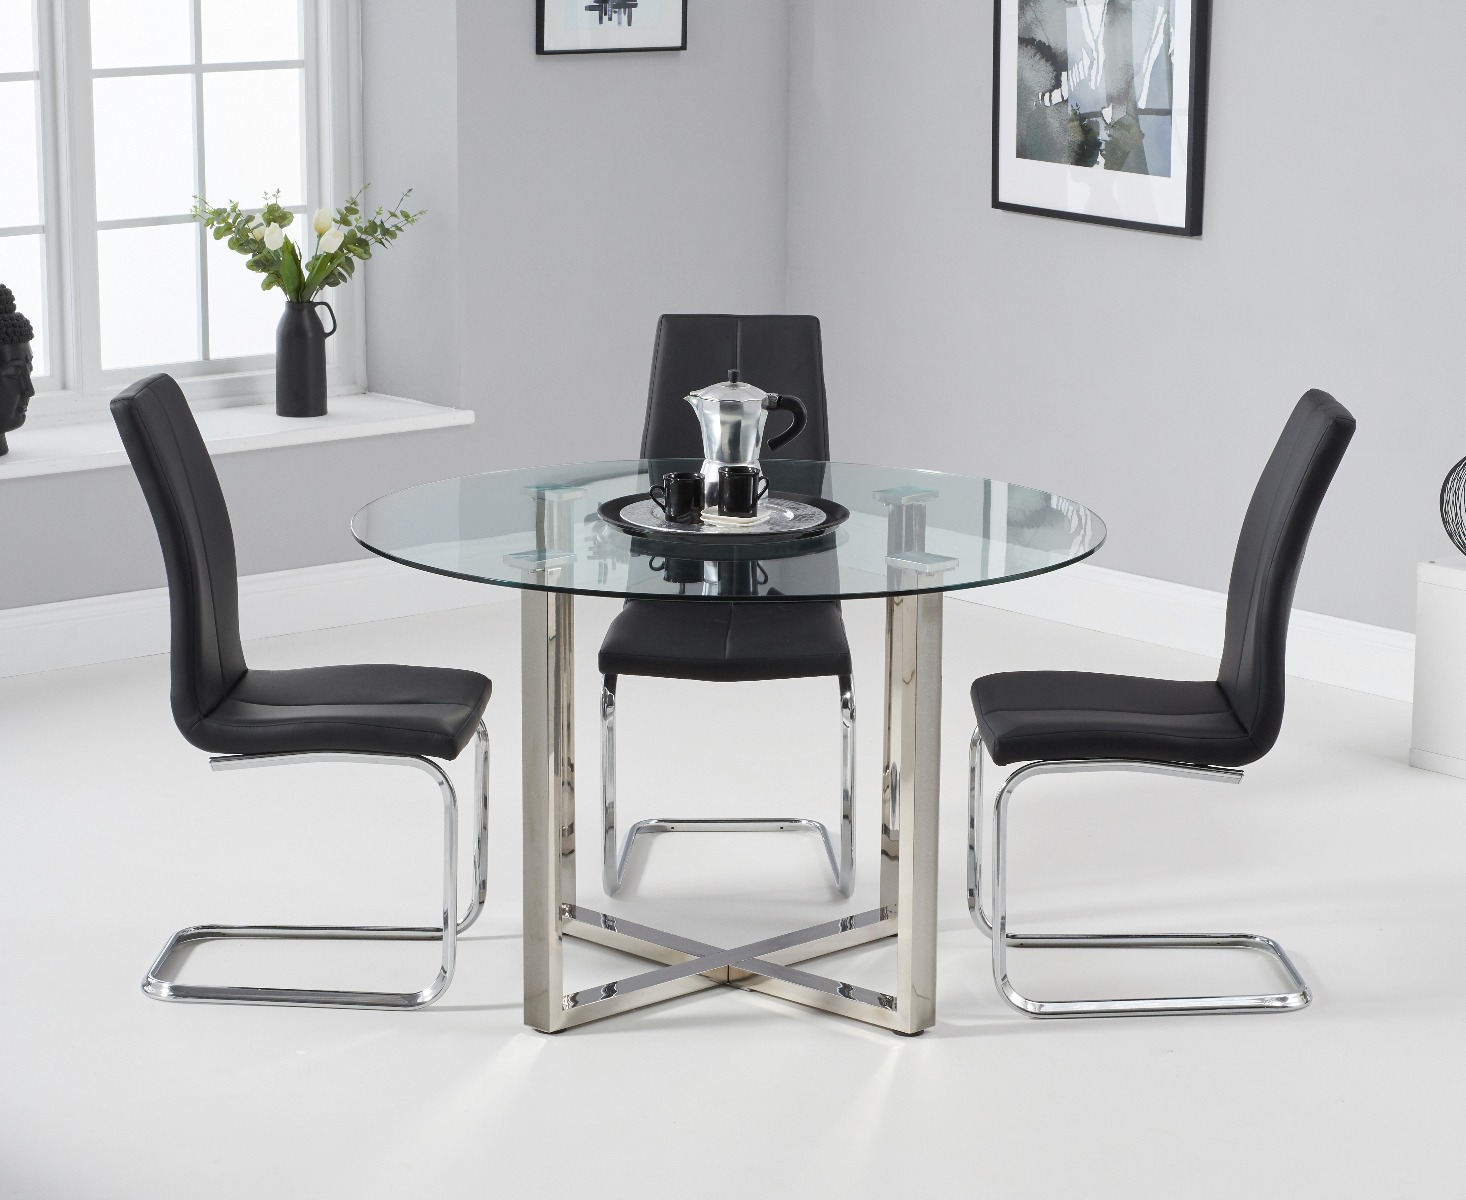 Photo 2 of Vaso 120cm round glass dining table with 4 grey gianni dining chairs